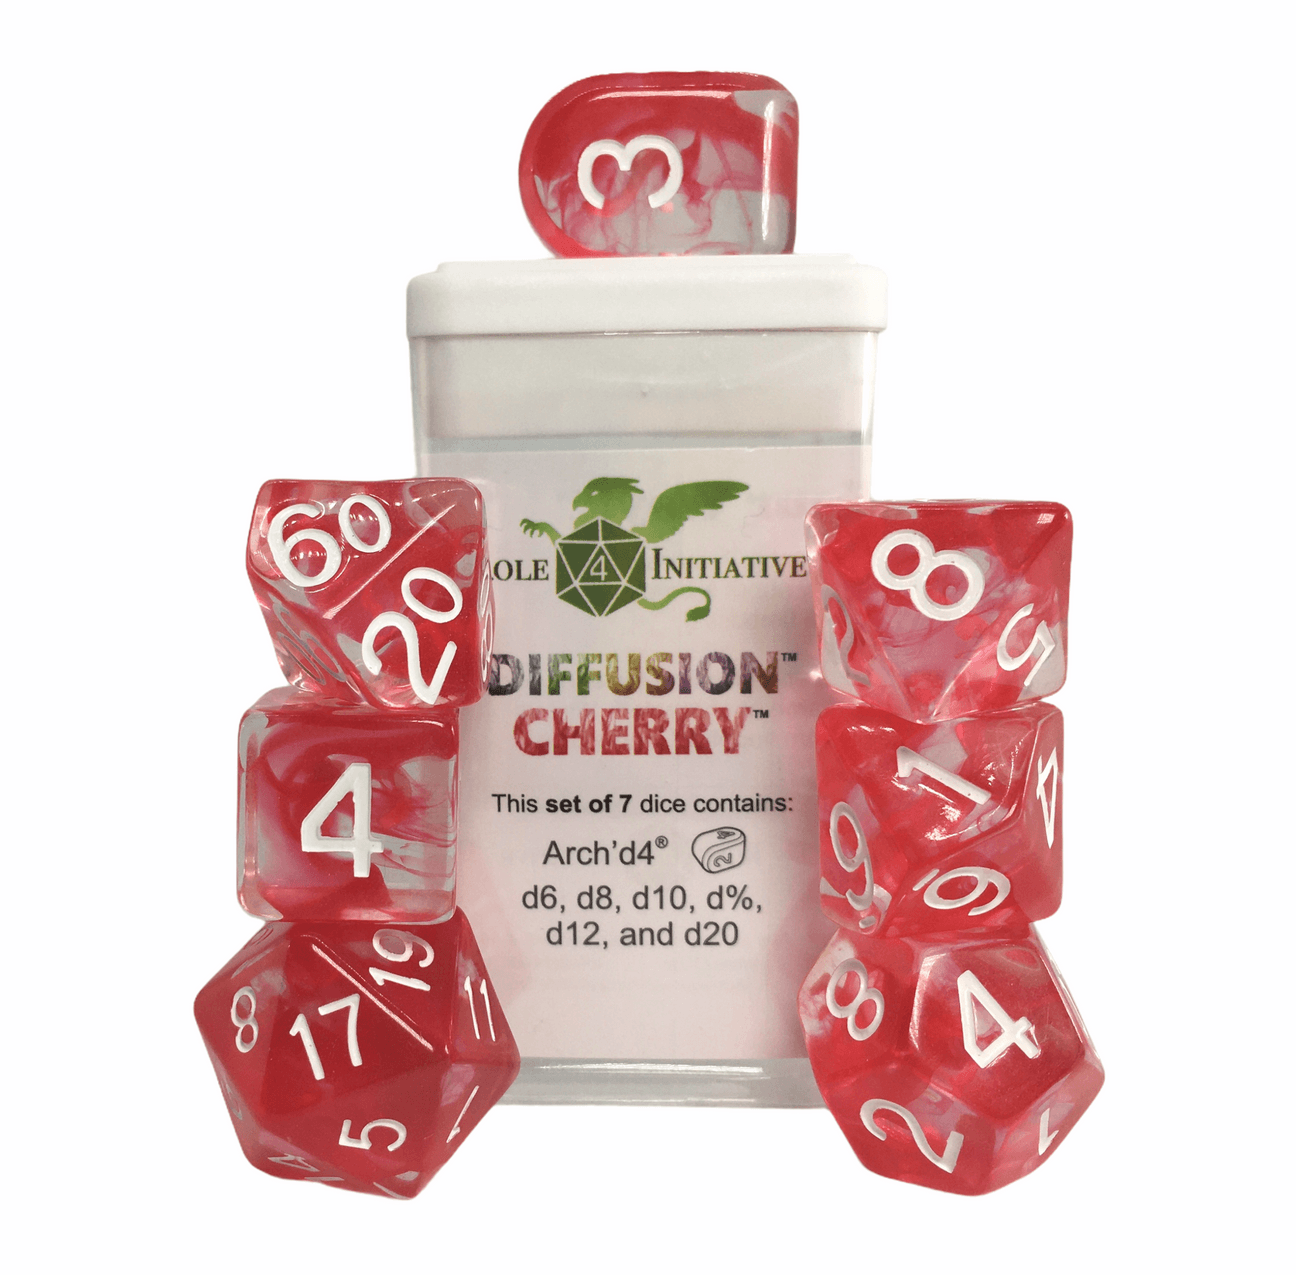 Diffusion Cherry - 7 dice set (with Arch’d4™) - The Fourth Place